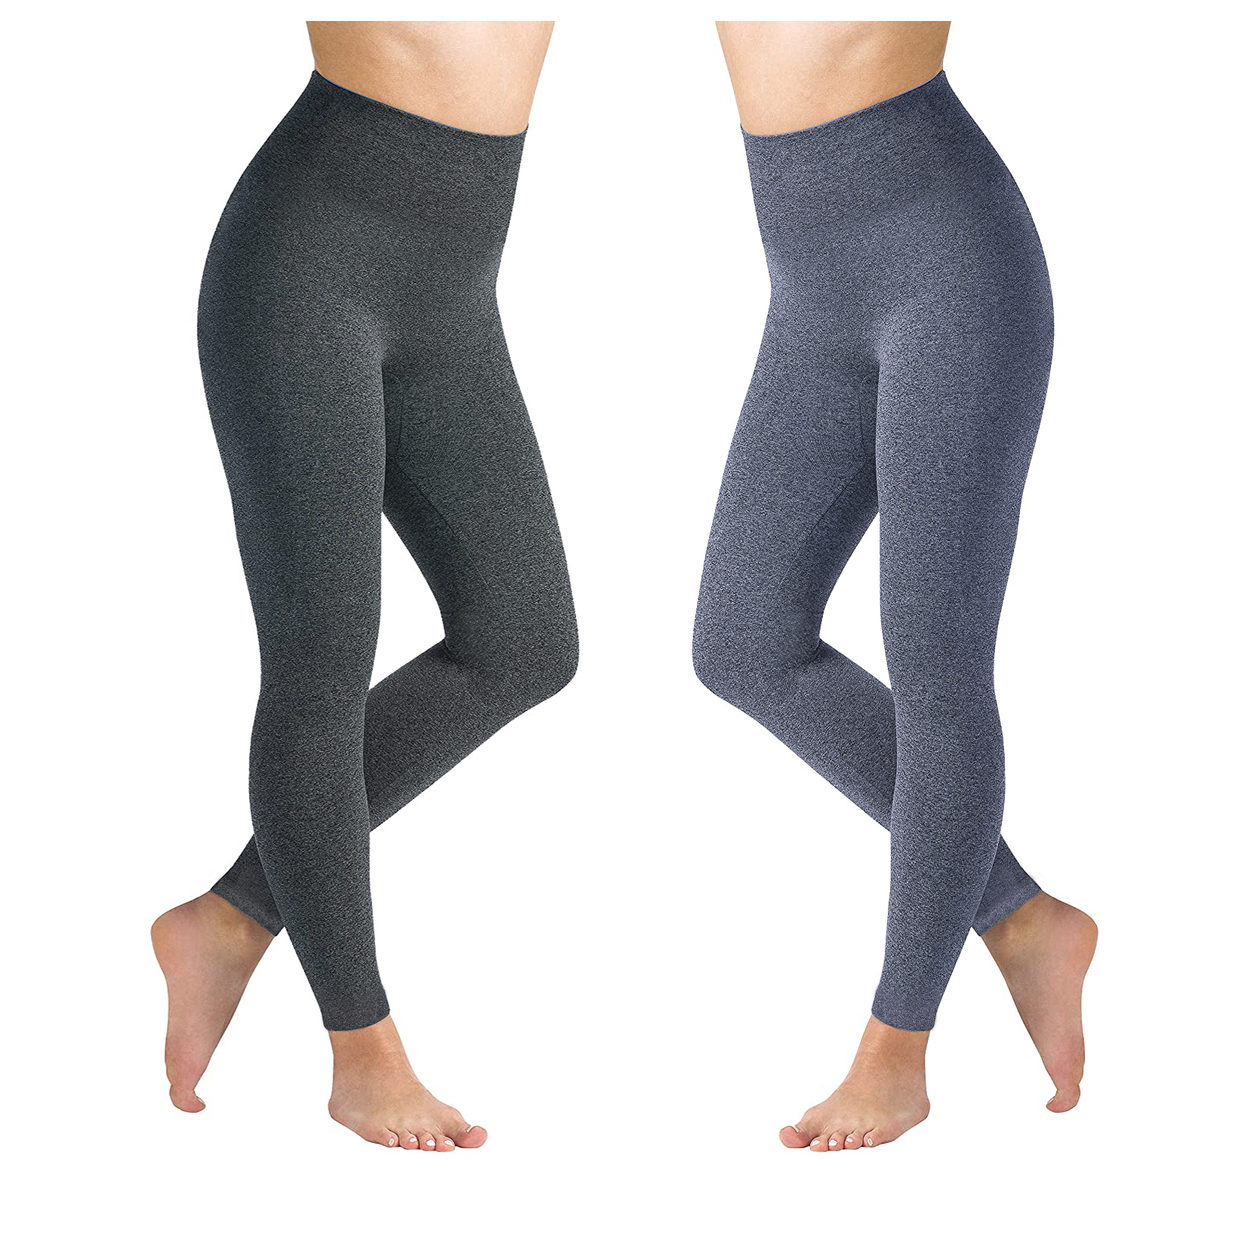 2-Pack: Women's High Waisted Ultra Soft Fleece Lined Warm Marled Leggings(Available In Plus Sizes) - Charcoal & Navy, 2x